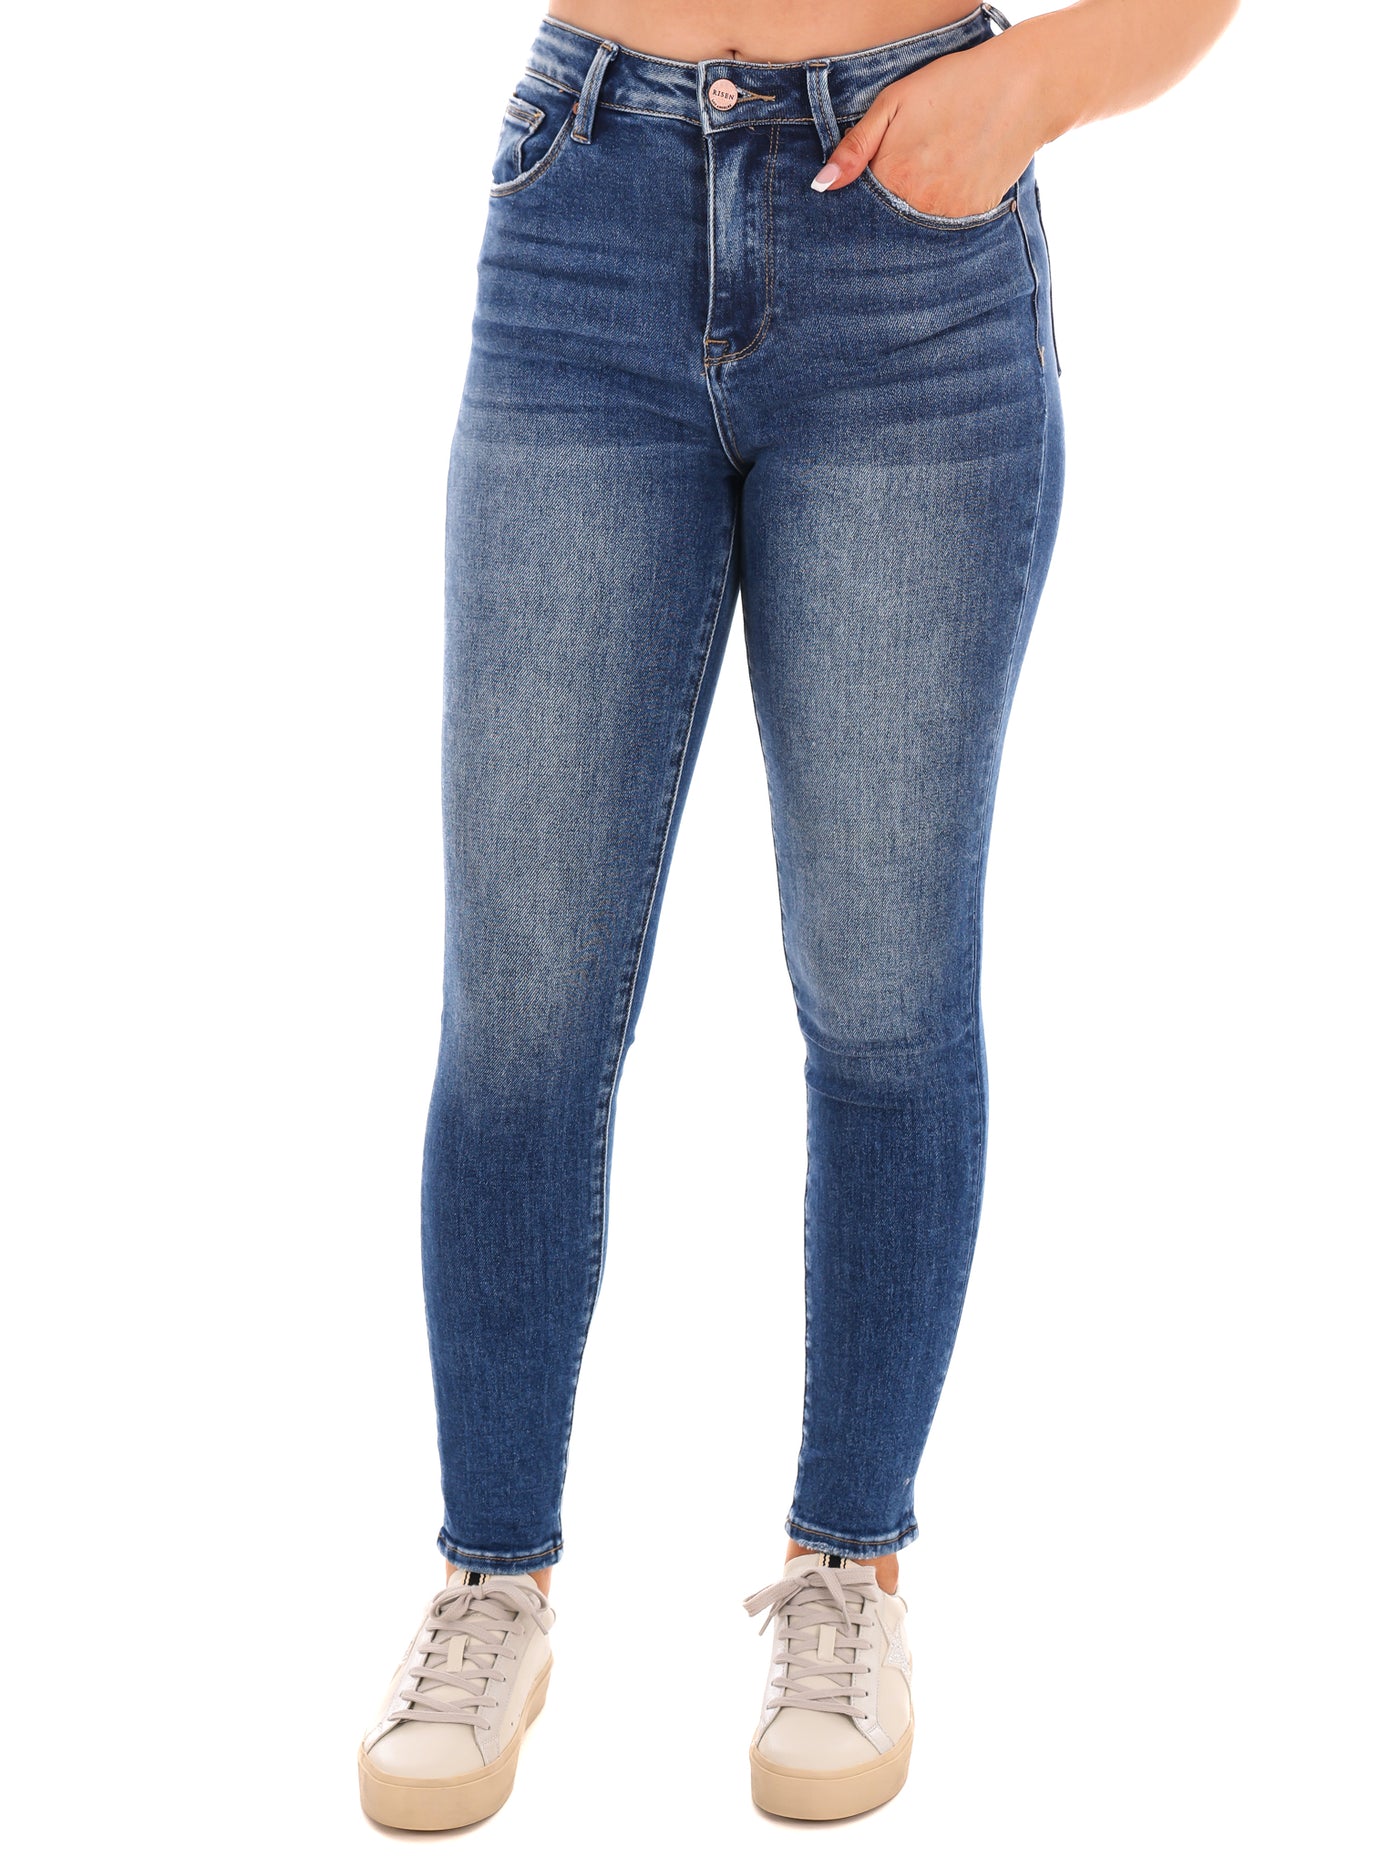 Never Alone High Rise Ankle Skinny Jean